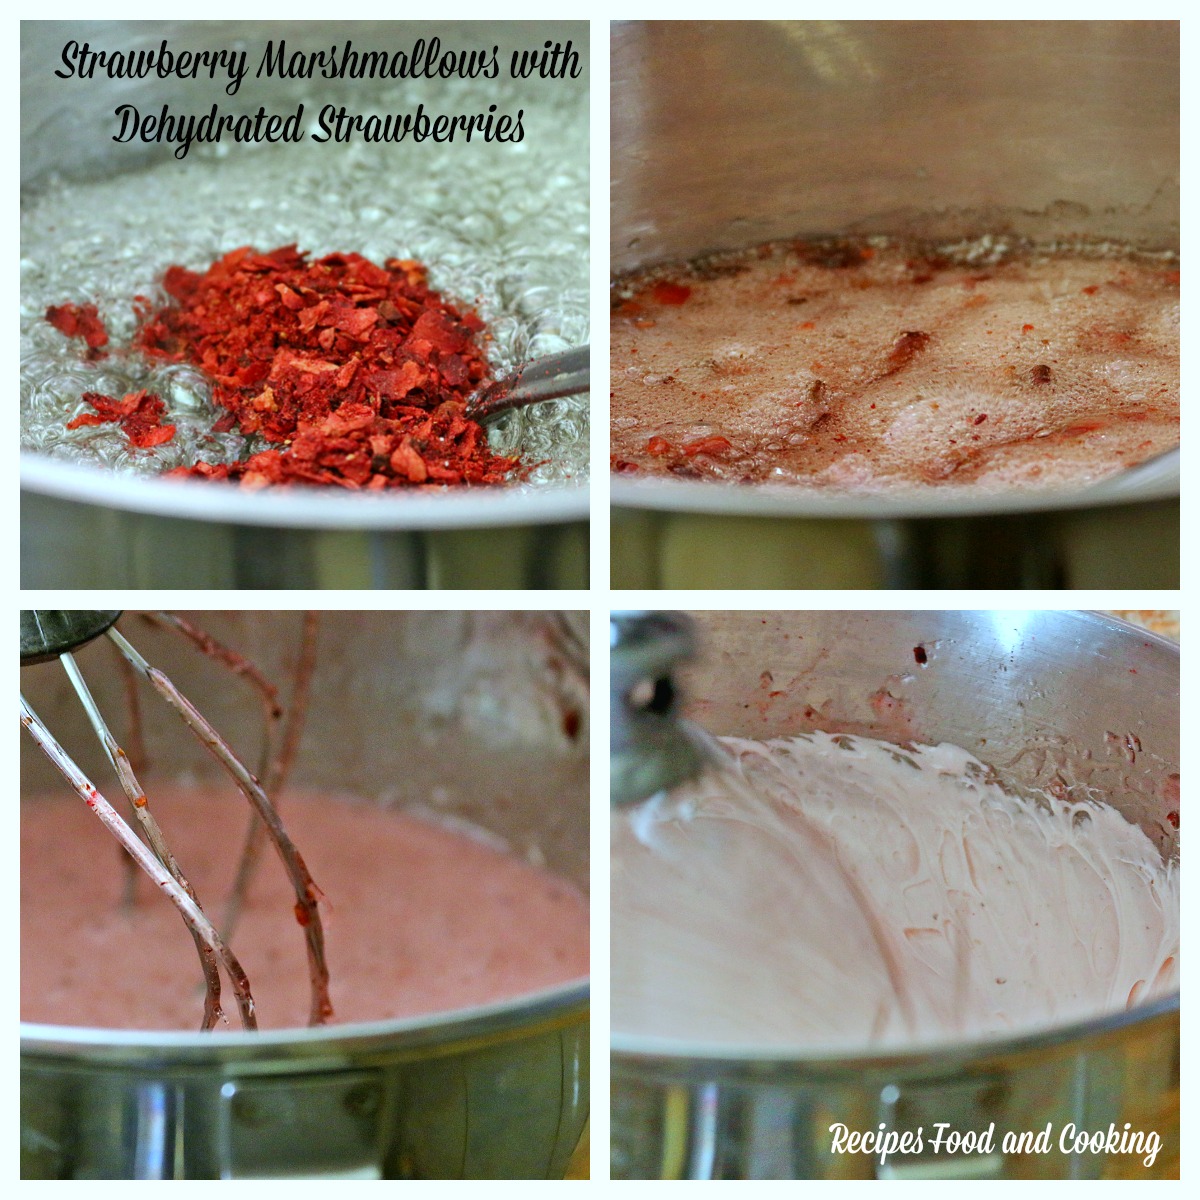 Strawberry Marshmallows with Dehydrated Strawberries